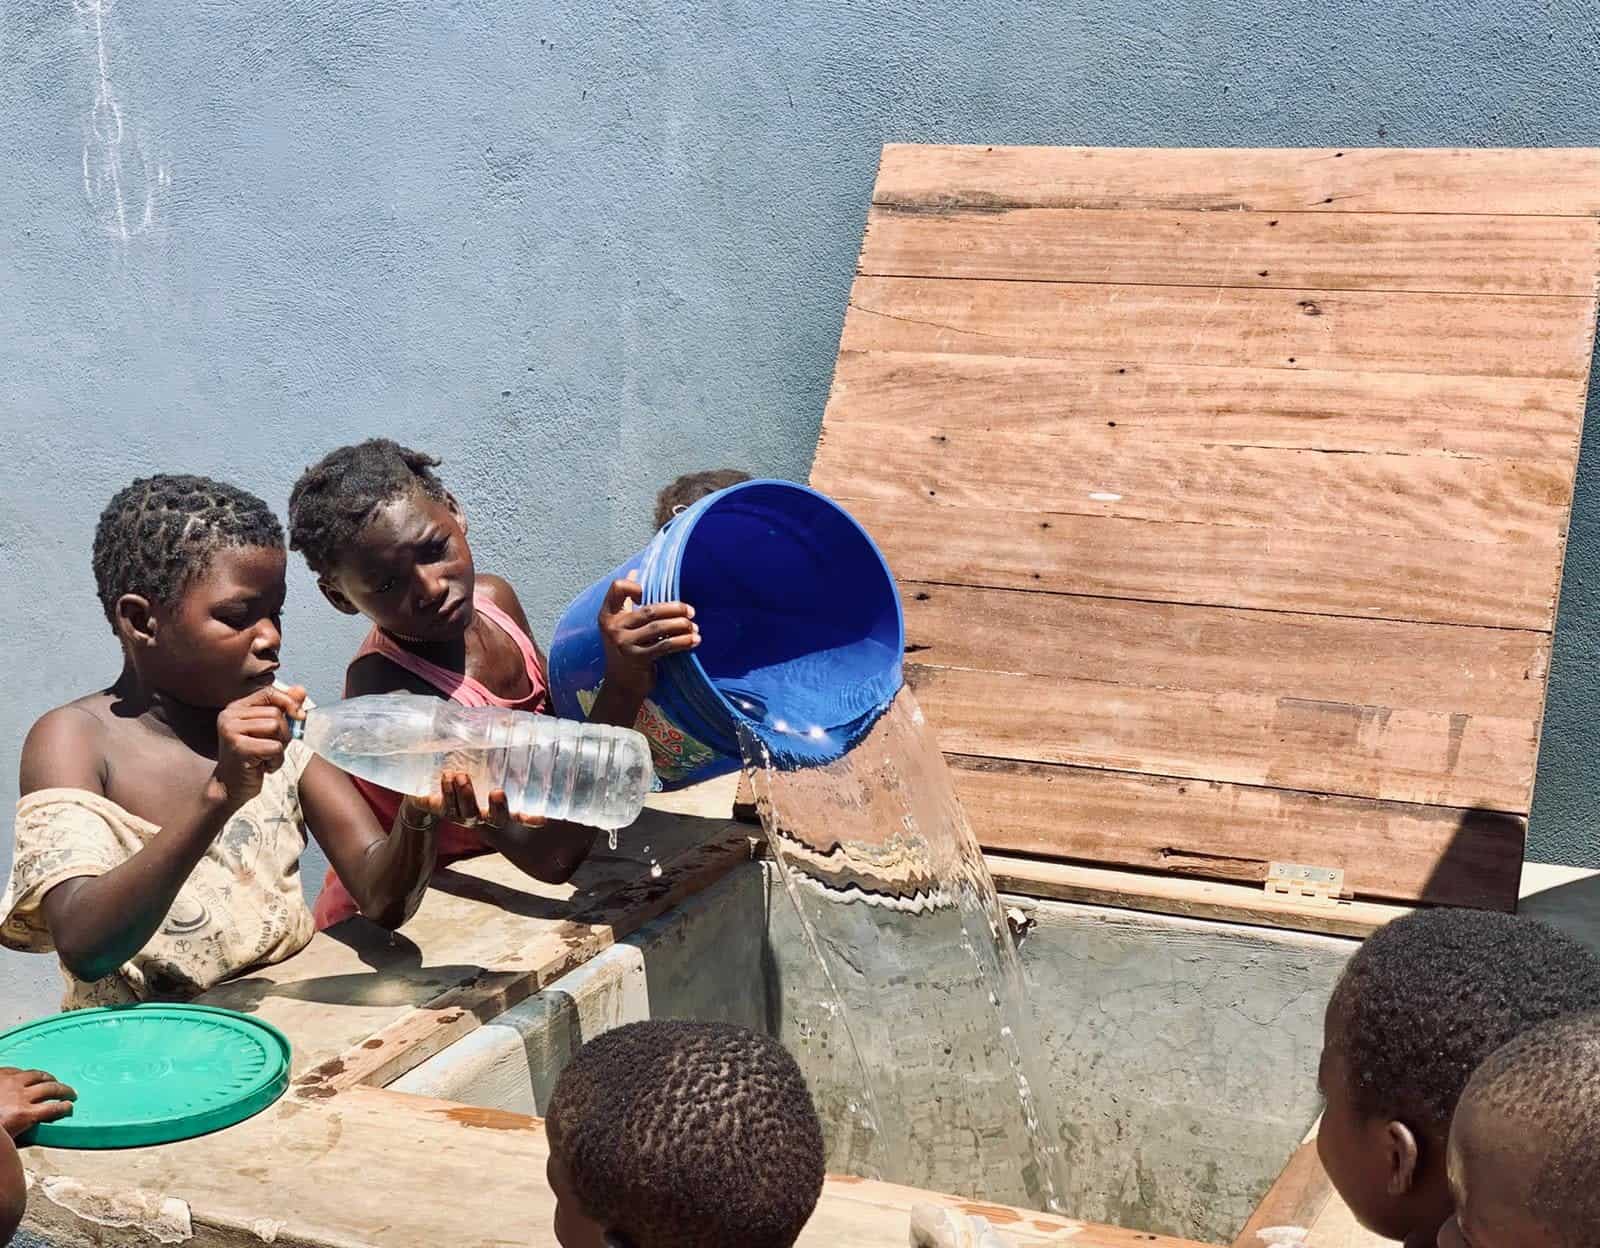 Mozambique children filling up their drinking water supplies which they collected at the desalination unit of elemental water makers